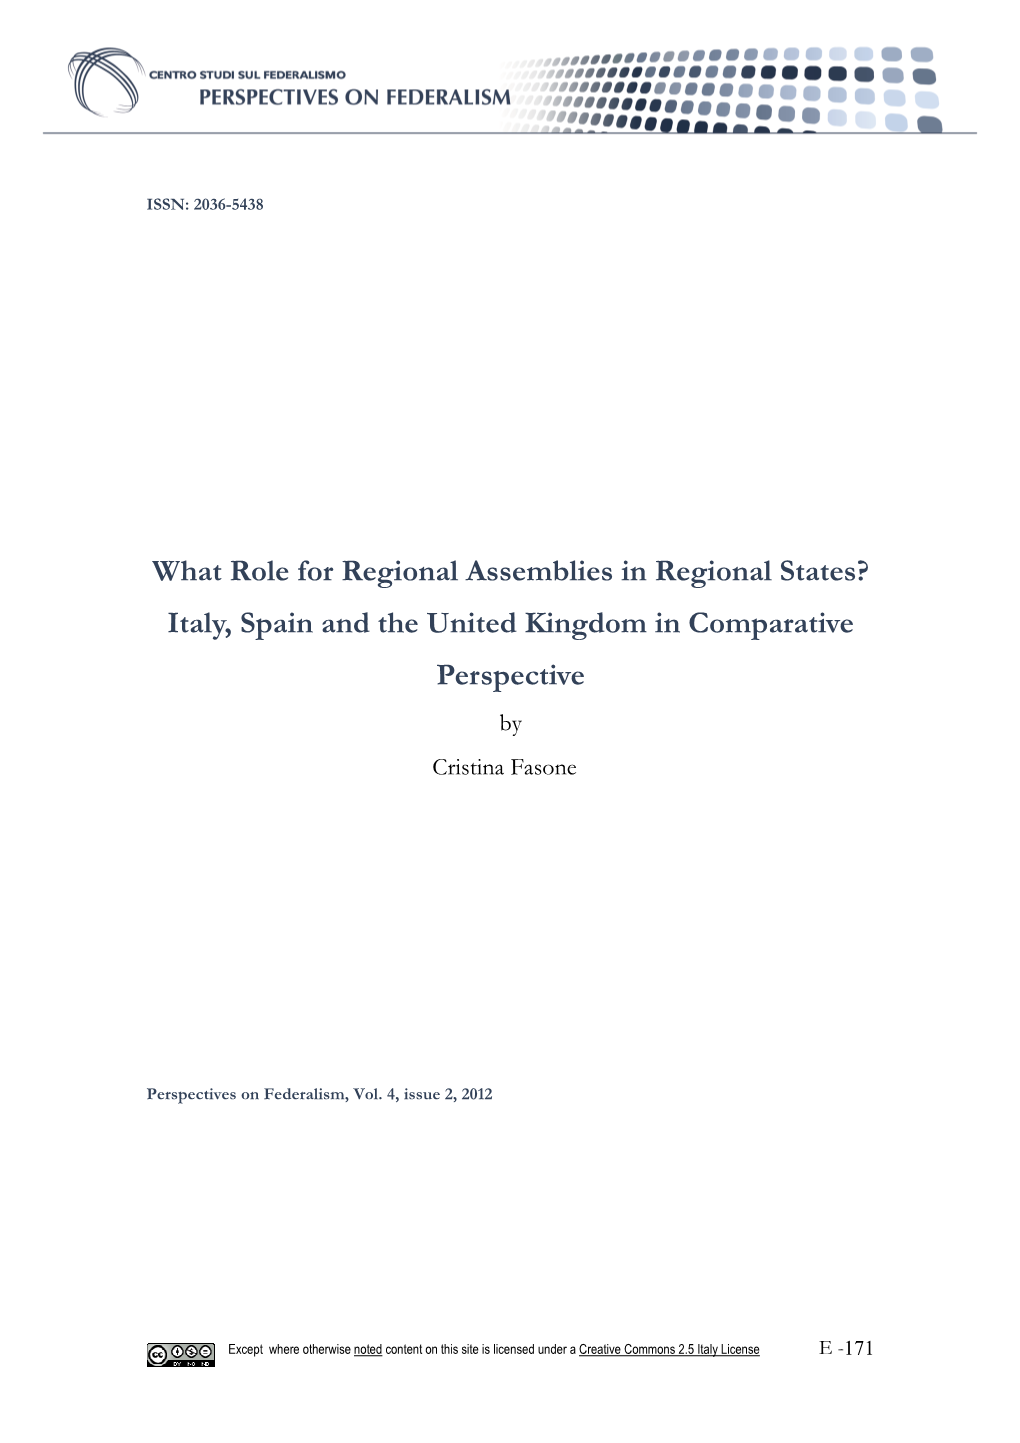 What Role for Regional Assemblies in Regional States? Italy, Spain and the United Kingdom in Comparative Perspective by Cristina Fasone ∗